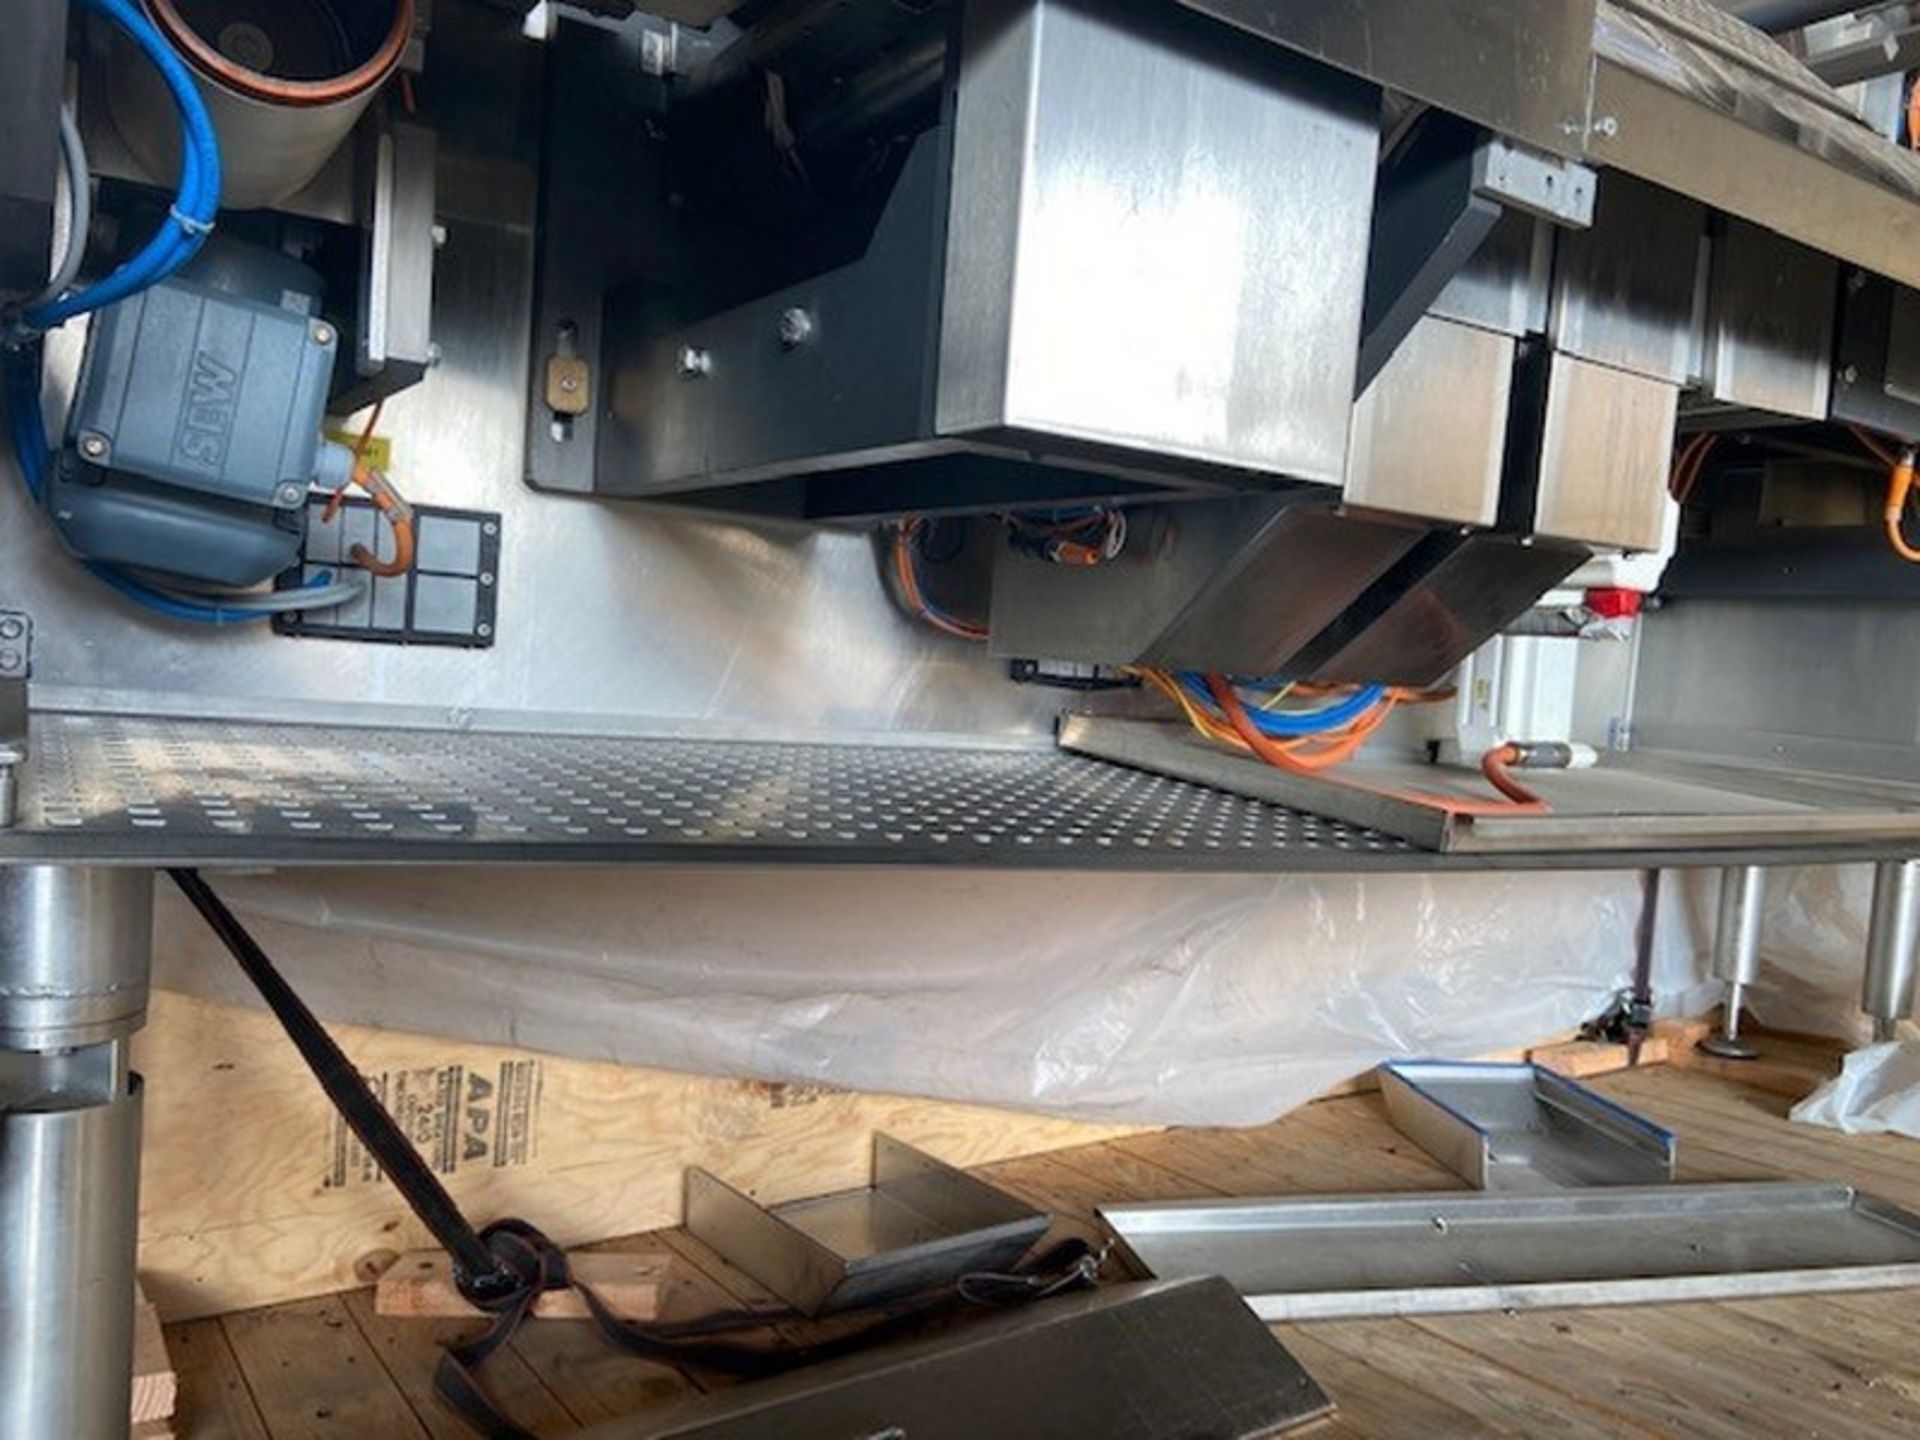 2019 CT Pack Single Lane Flow Wrapper with Additional Infeed Conveyor (Aprox. $350,000), Model - Image 8 of 19